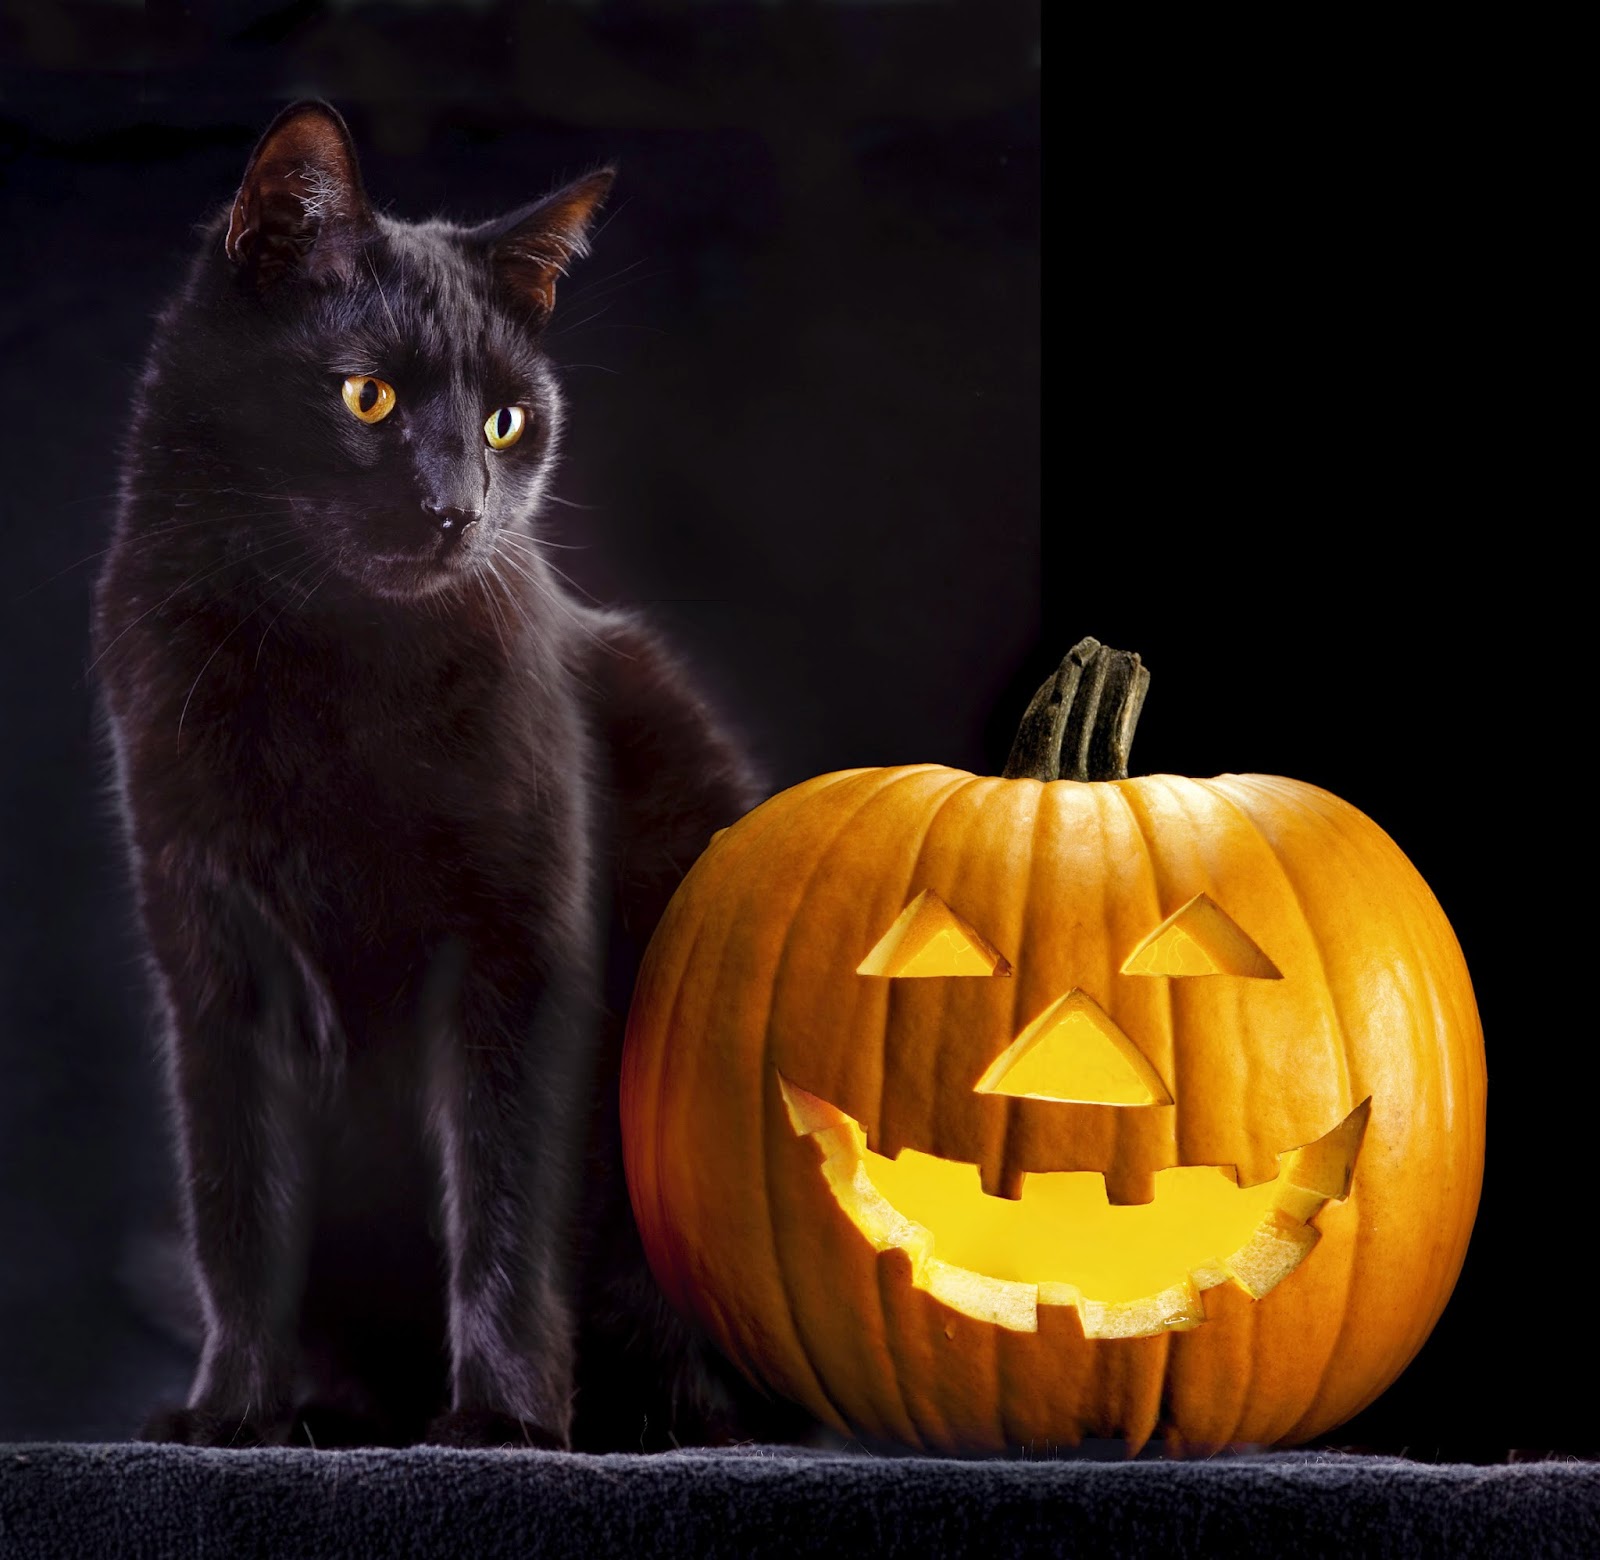 Bregman Veterinary Group: Tips to Keep Your Cat Safe This Halloween